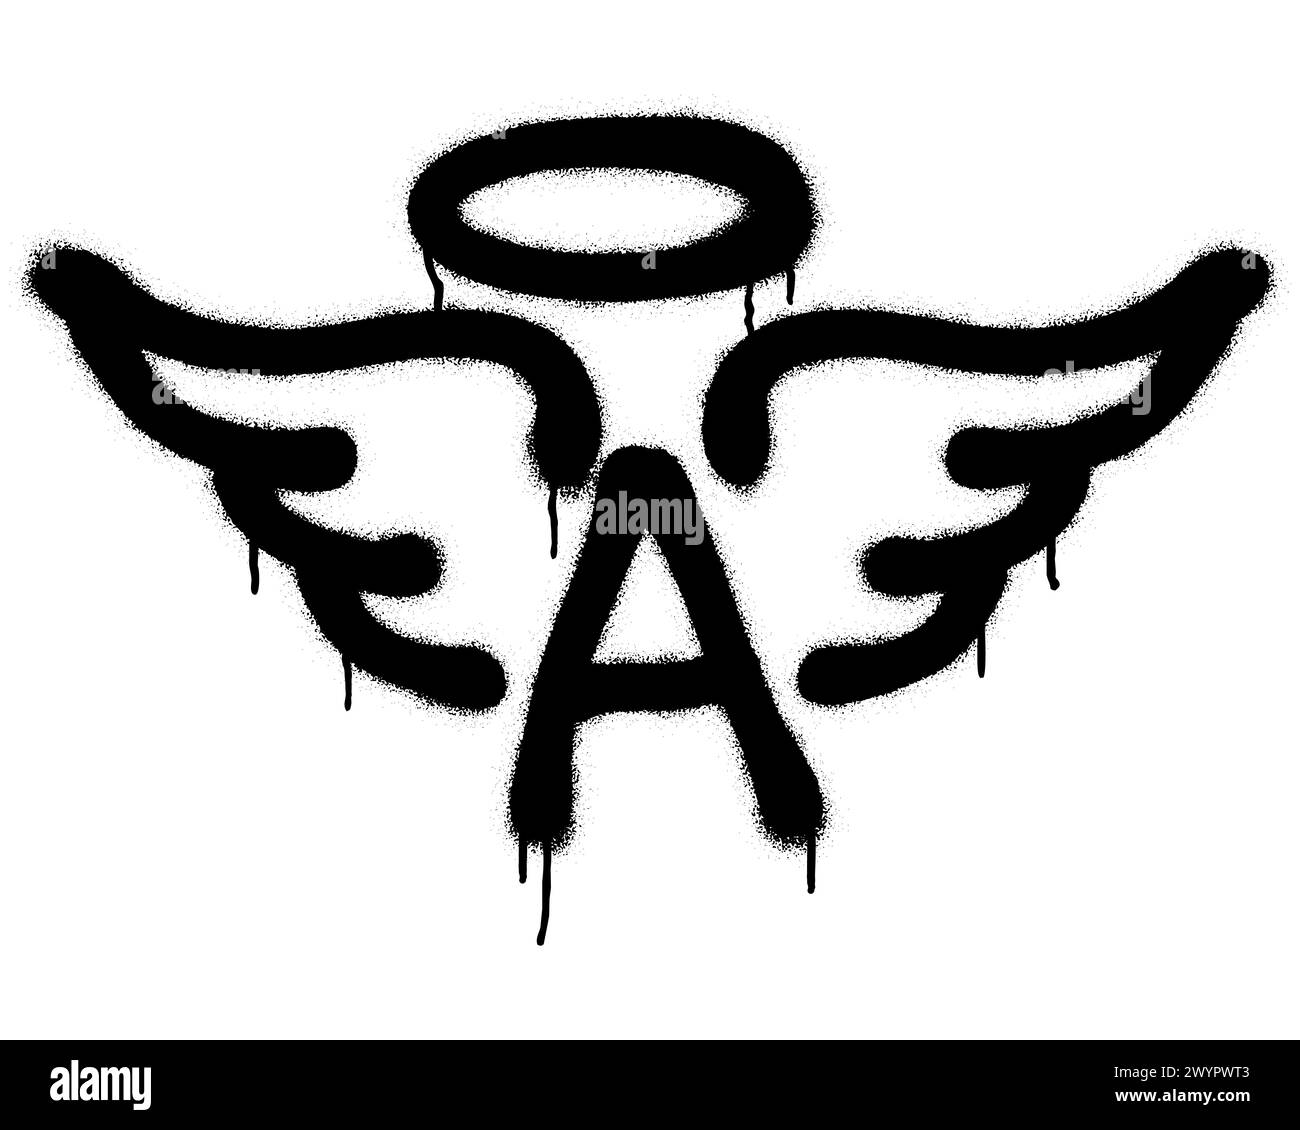 Spray graffiti letter A, wings and halo symbols over white. Stylized angel emoji. Stock Vector